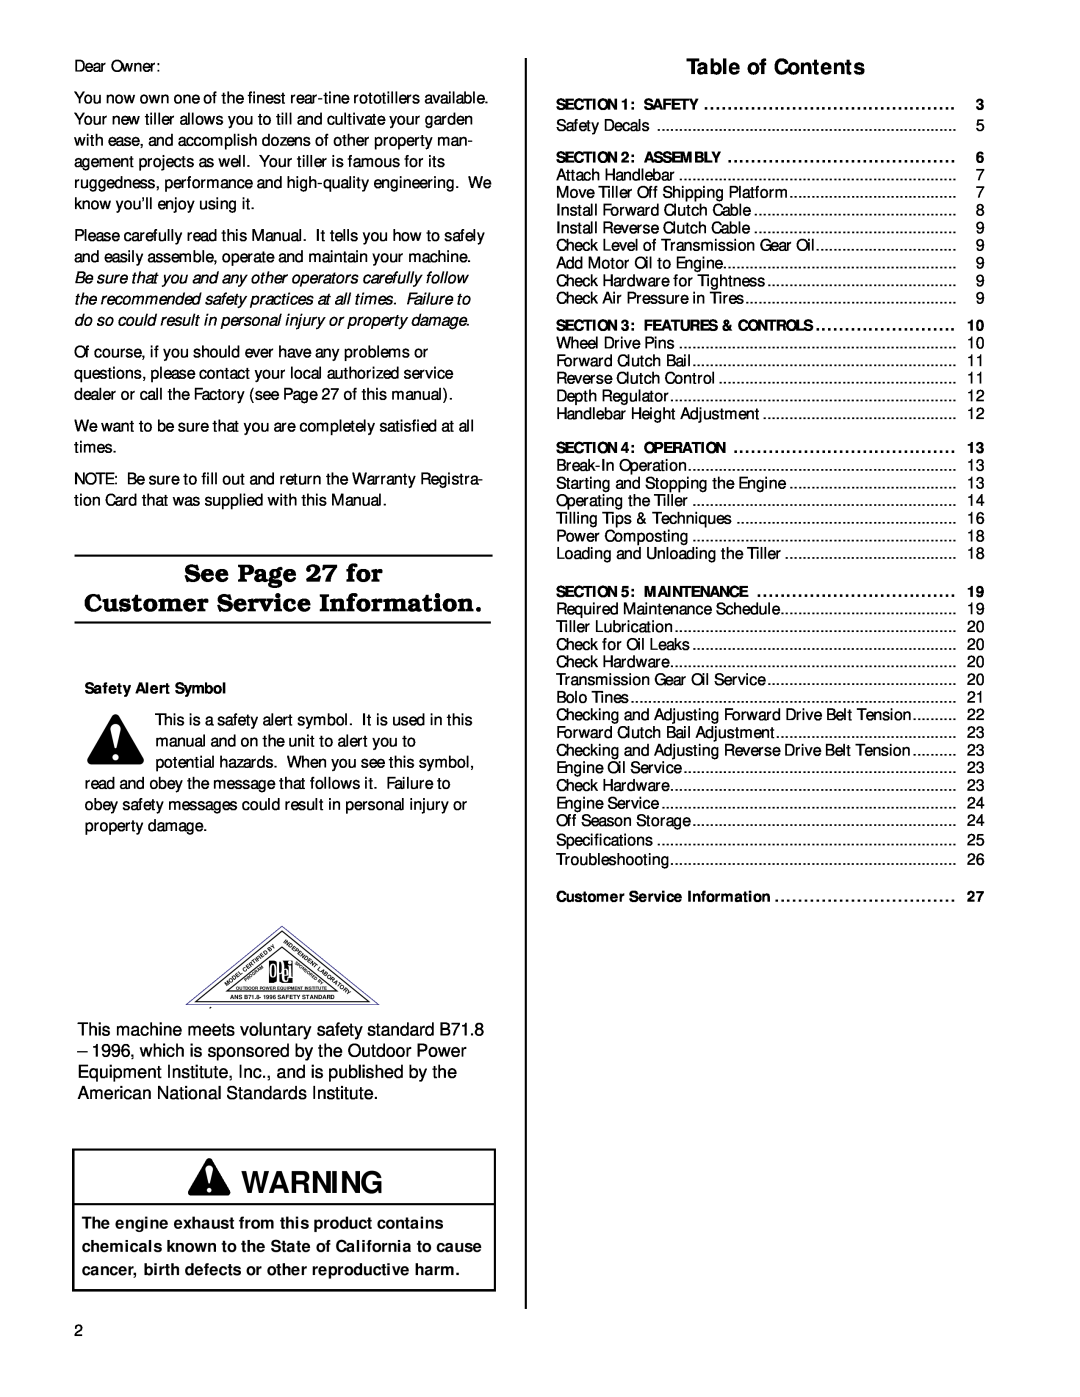 Bolens 12180 owner manual Table of Contents, See Page 27 for Customer Service Information, Safety Alert Symbol, Assembly 